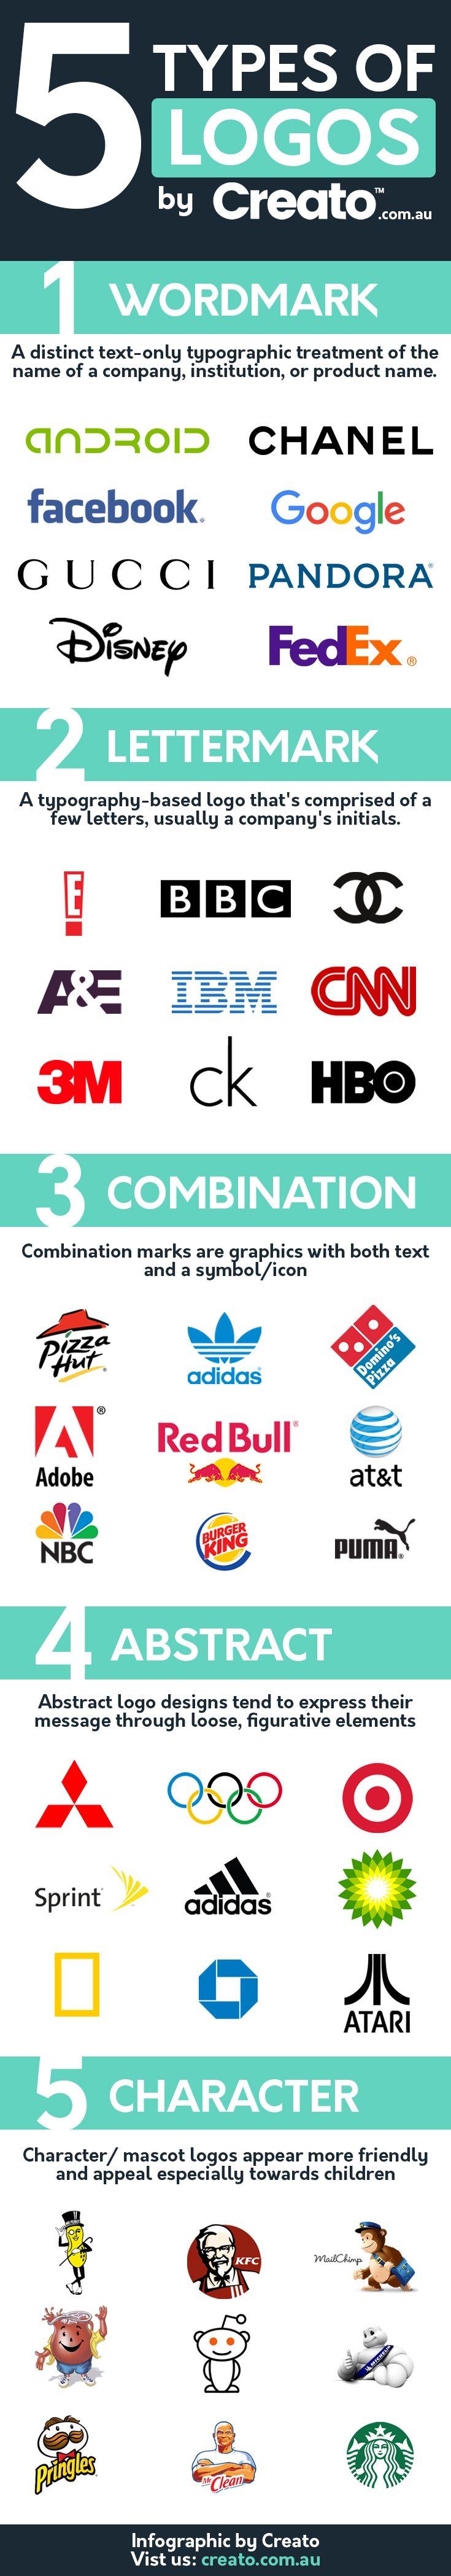 Different Types of Companies Logo - 5 Types of Logos: Which One is Right for Your Business? [Infographic]